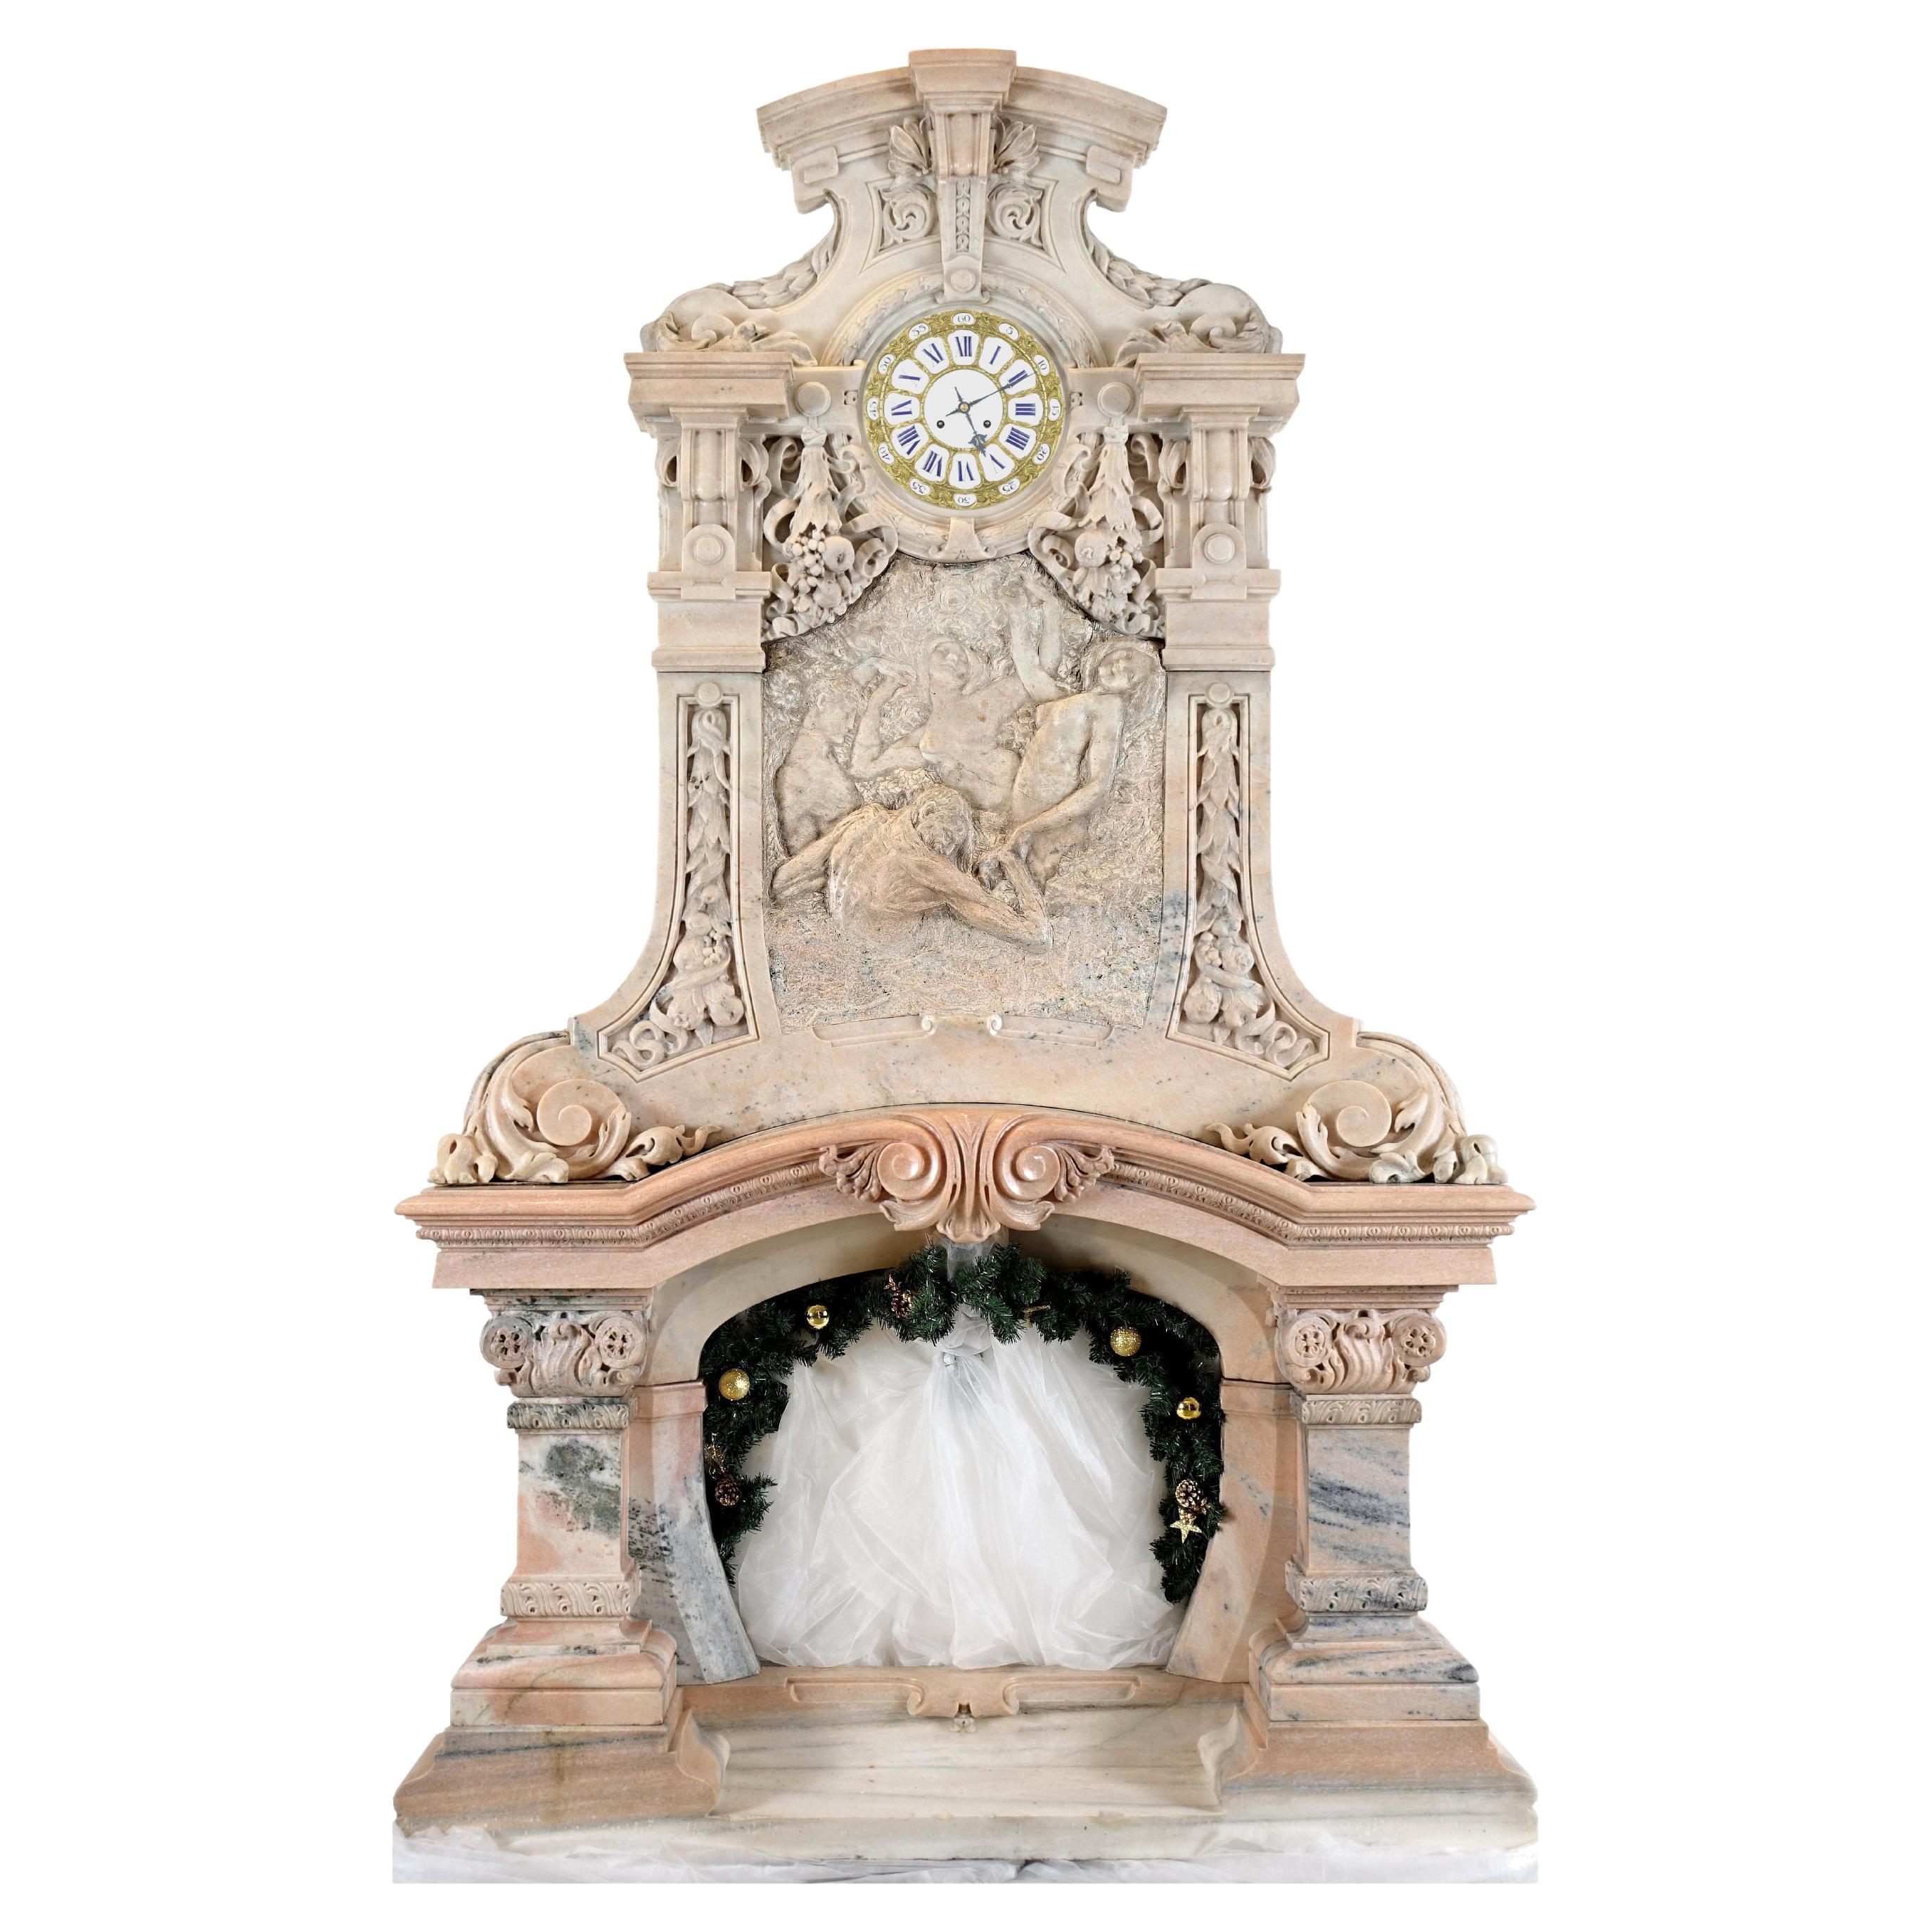 Fireplace with a Clock, "Candoglia" Marble of the Cathedral of Milan, 1895-1910